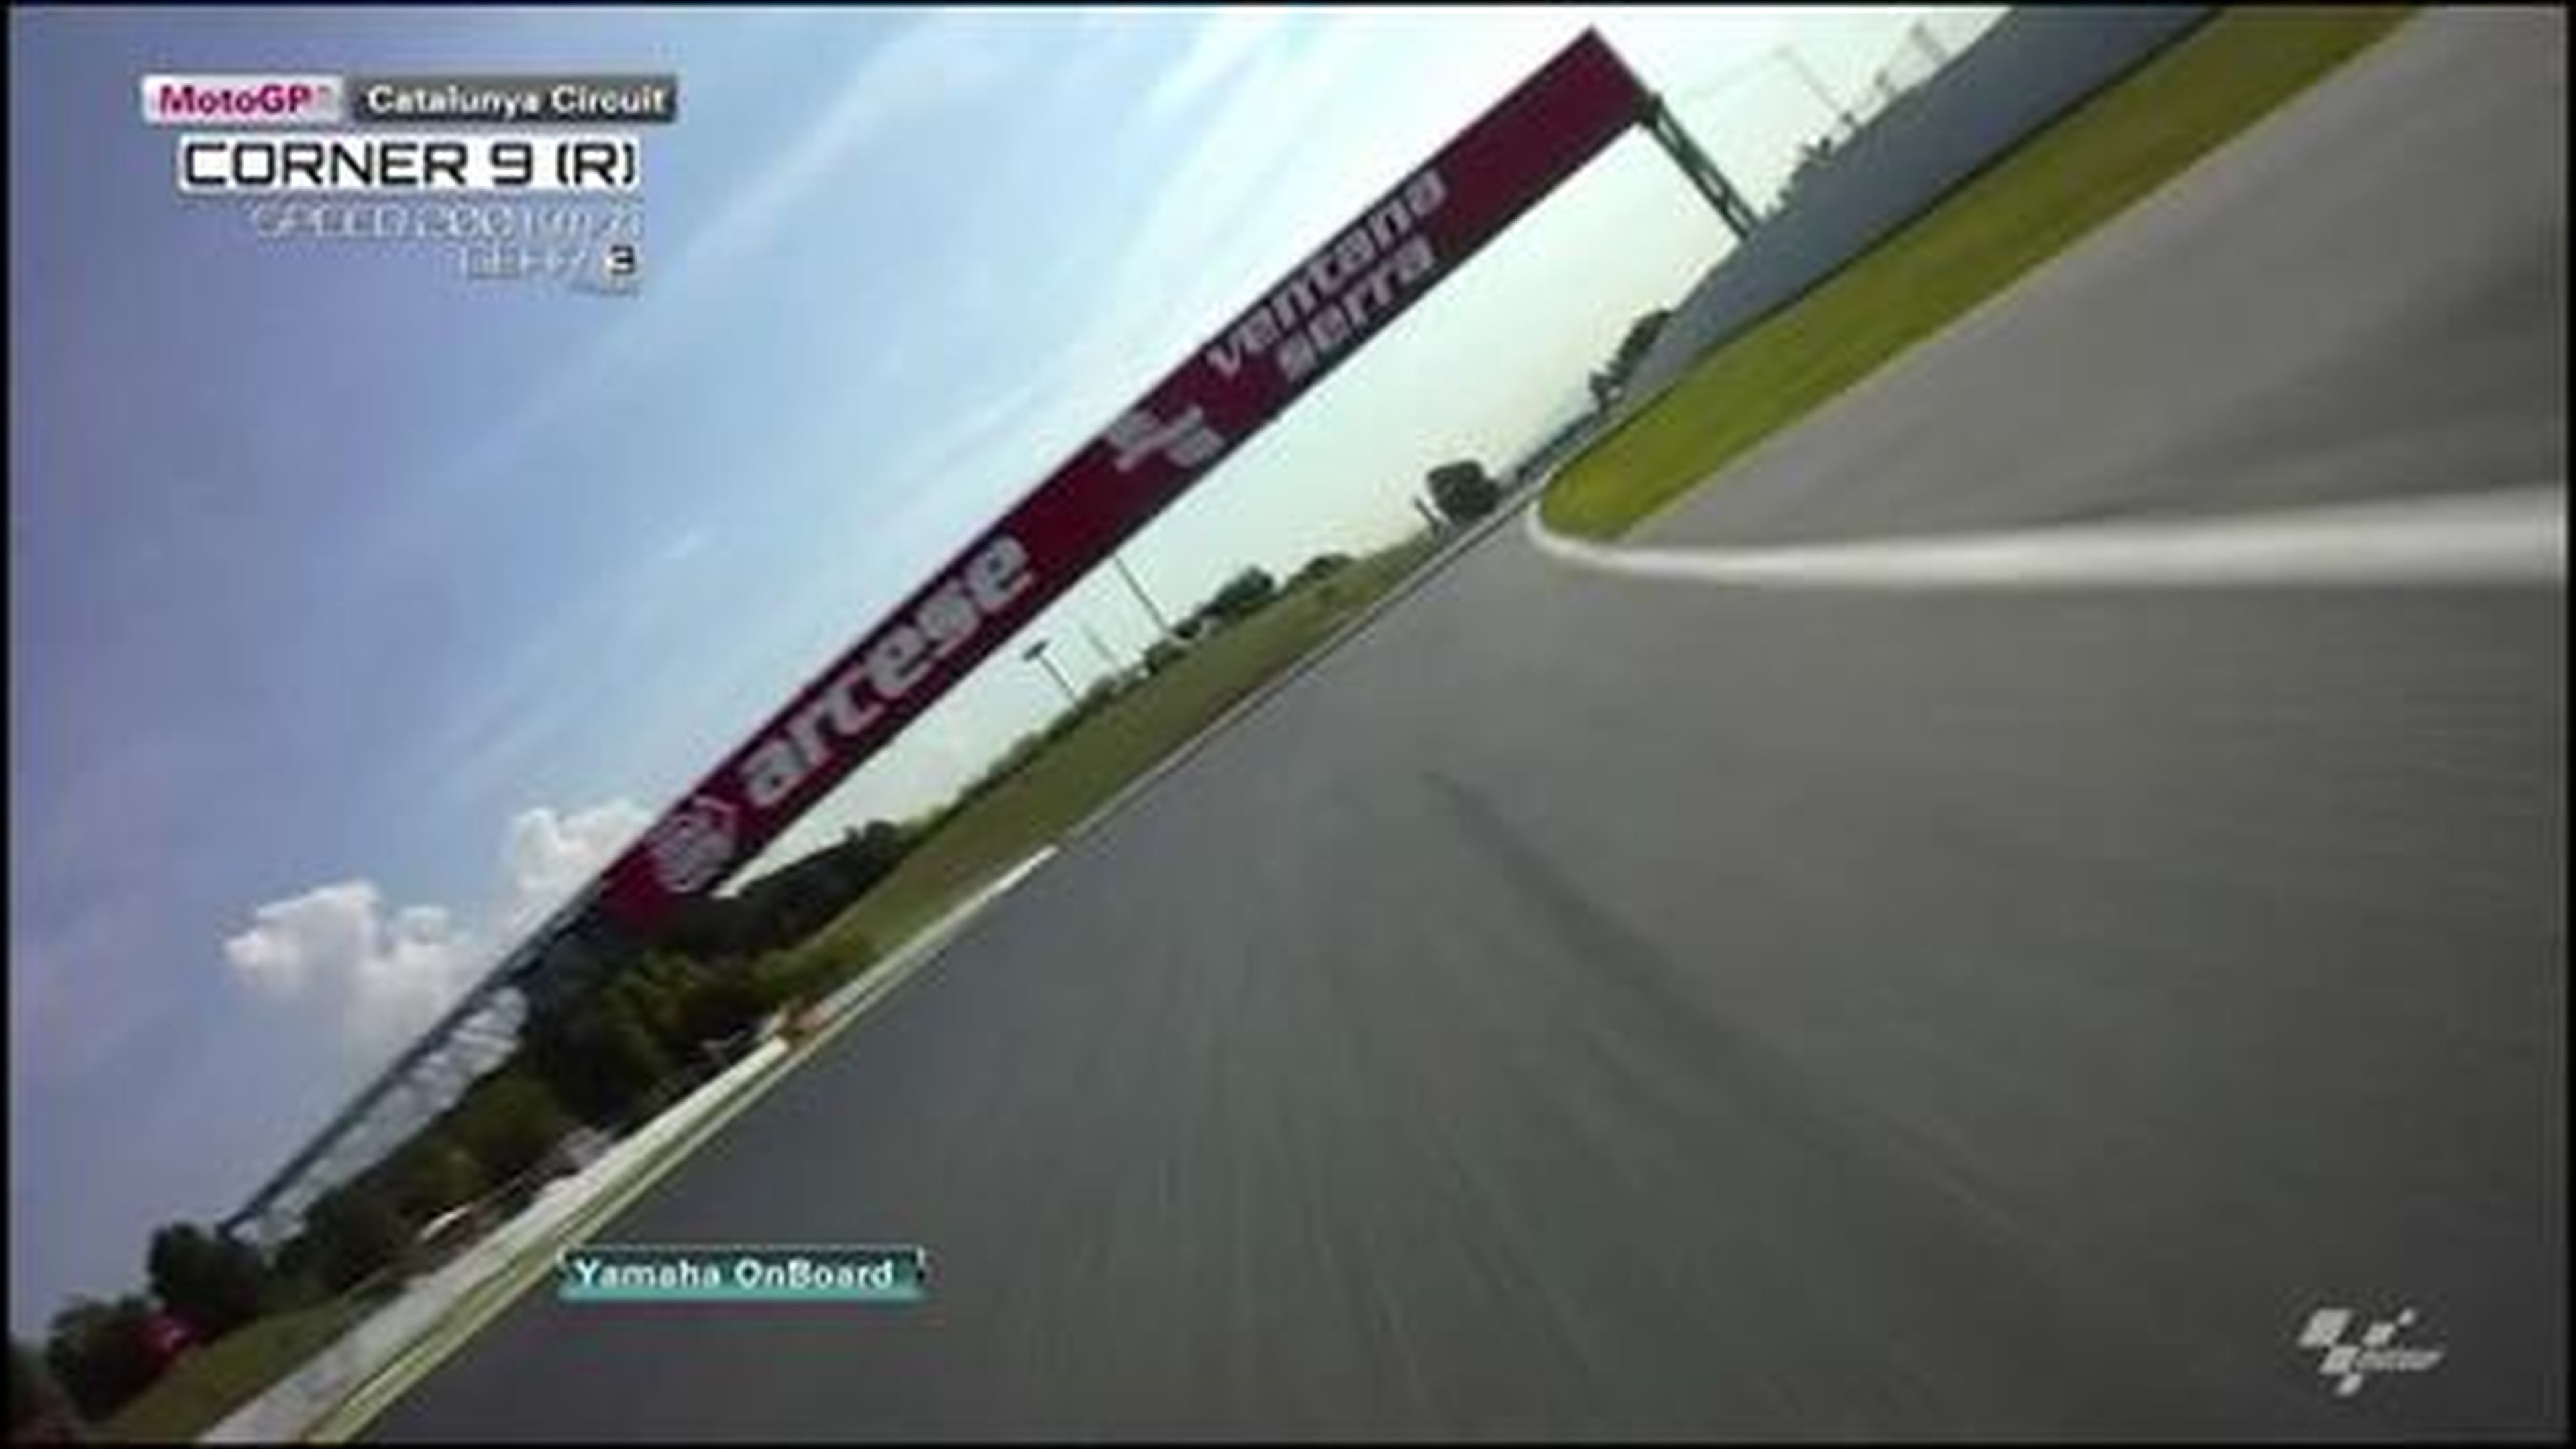 Monster Energy- Take a Lap of Catalunya with Jorge Lorenzo